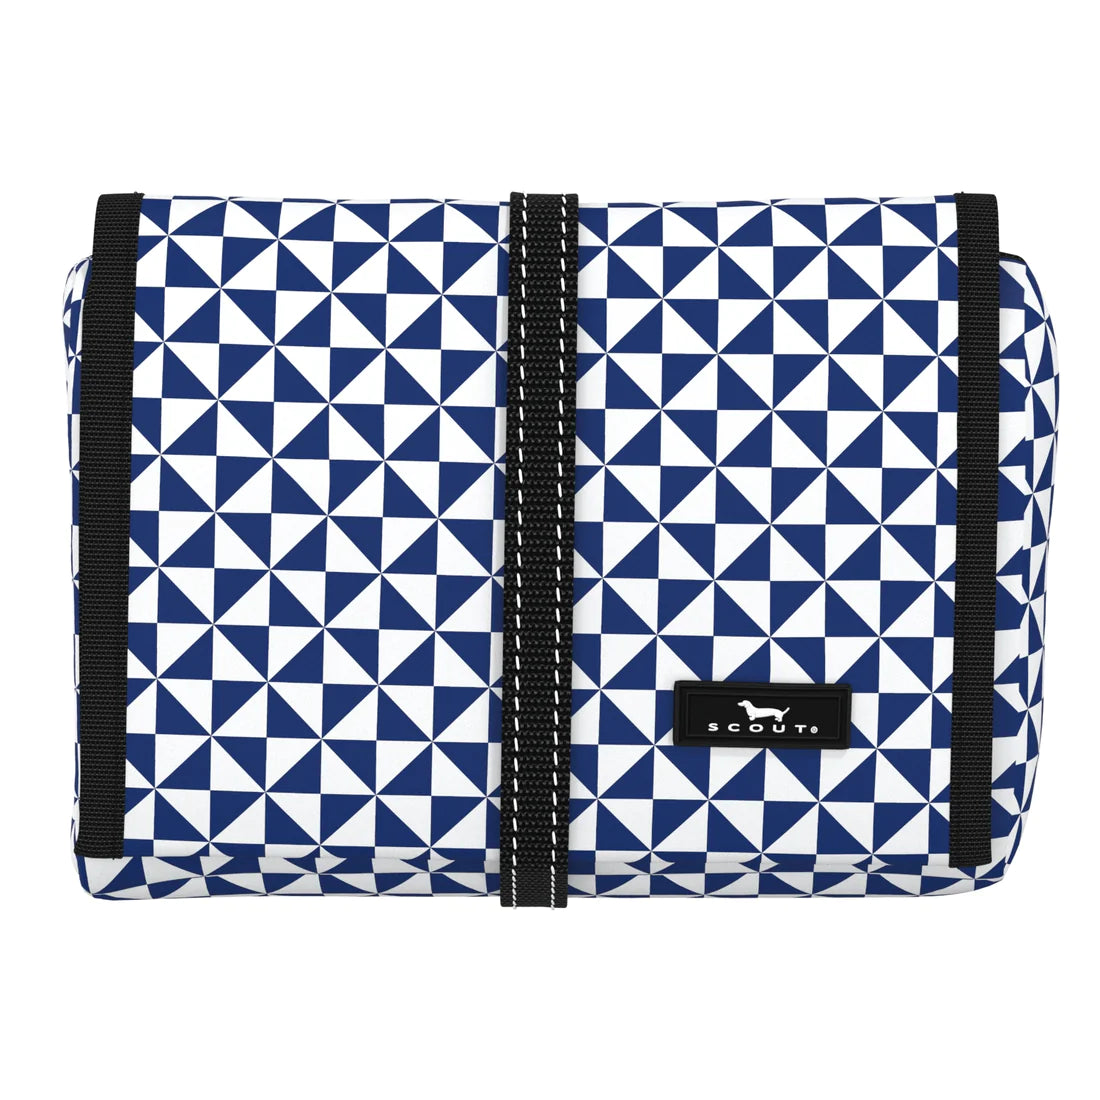 Scout Beauty Burrito Hanging Toiletry Bag - Tic Tac Tile